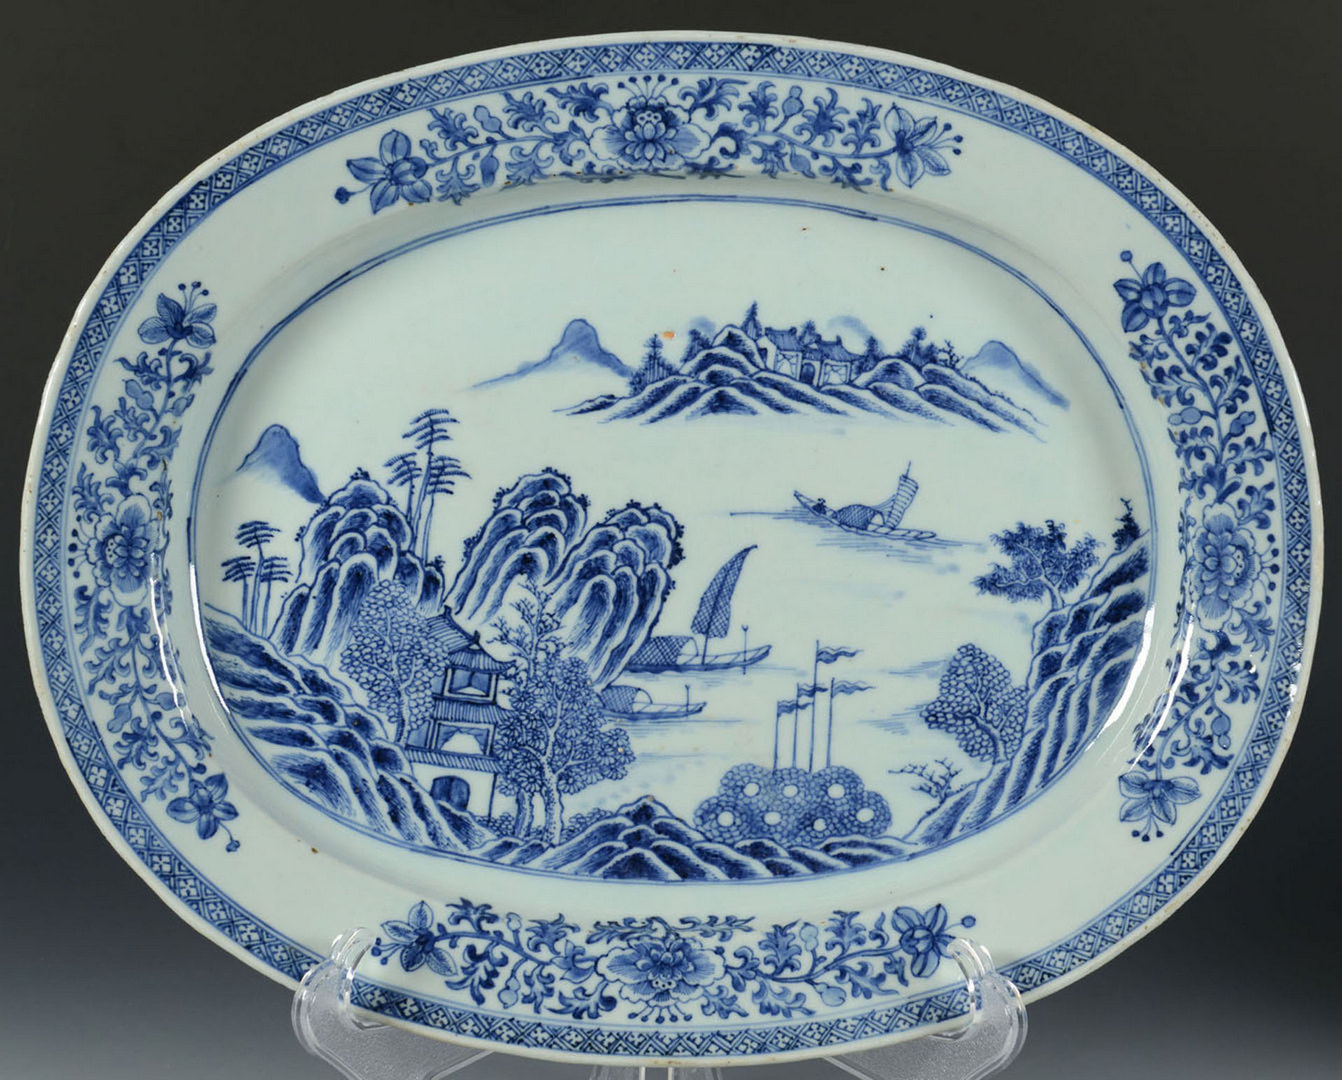 Lot 16: Blue and white Chinese Export oval covered tureen